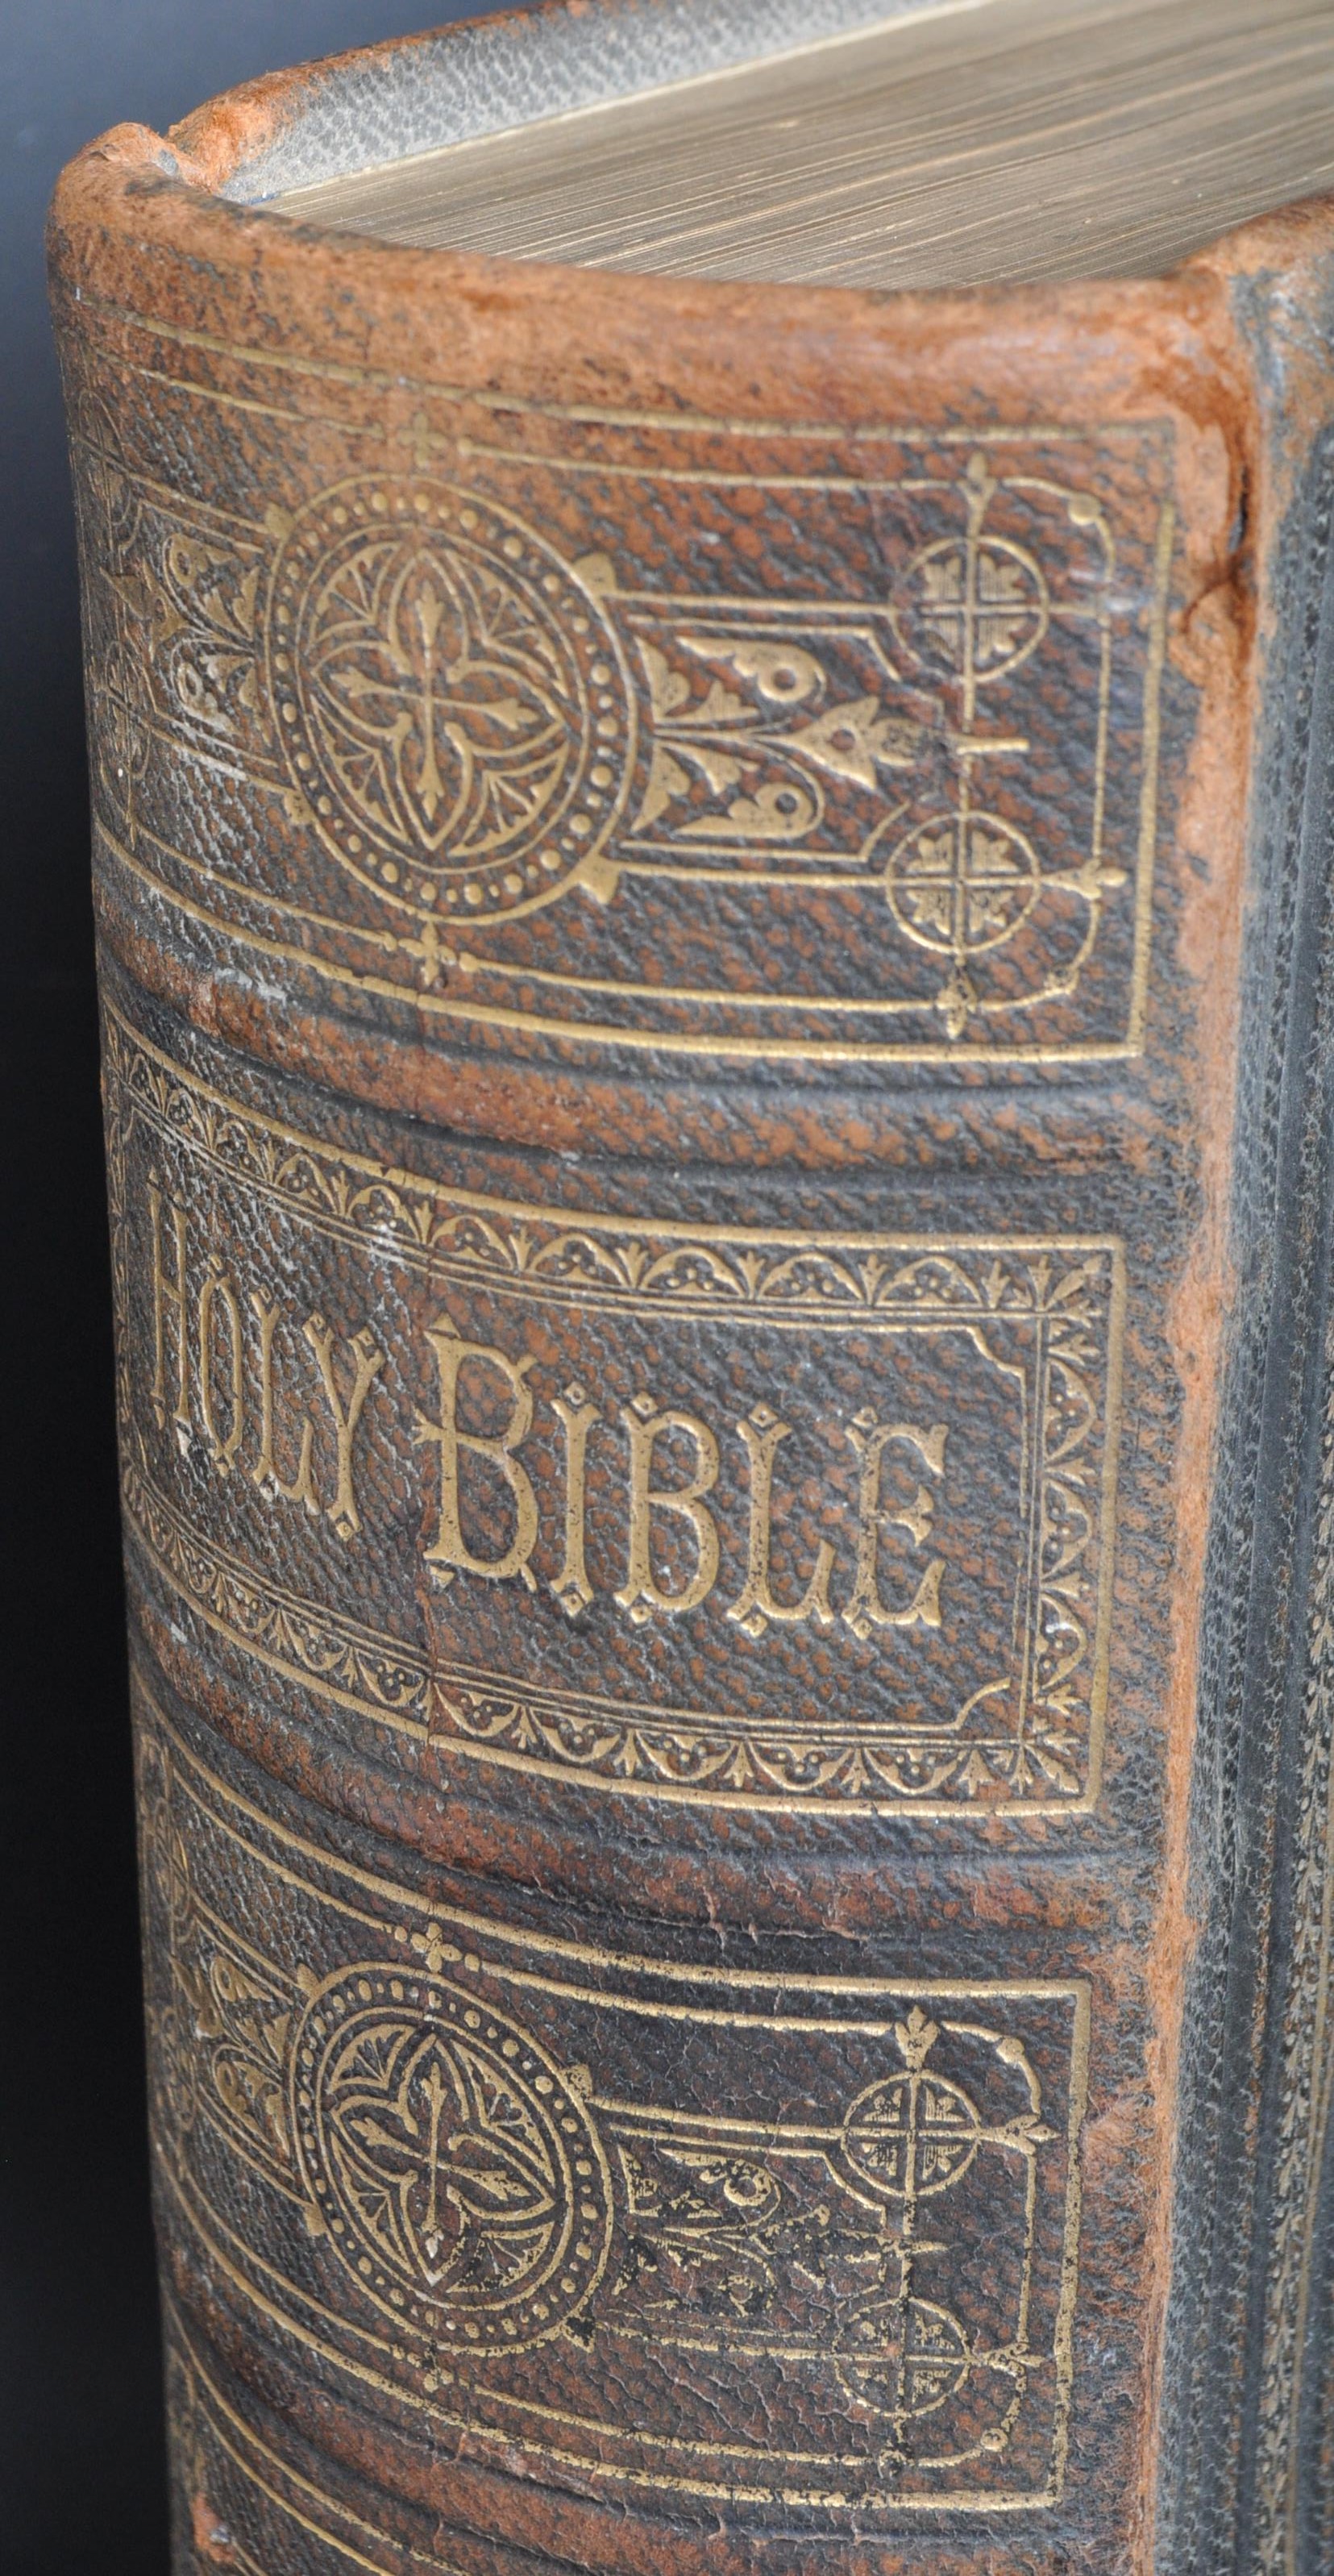 20TH CENTURY FAMILY BIBLE WITH SCOTT AND HENRY COMMENTARIES - Image 2 of 6